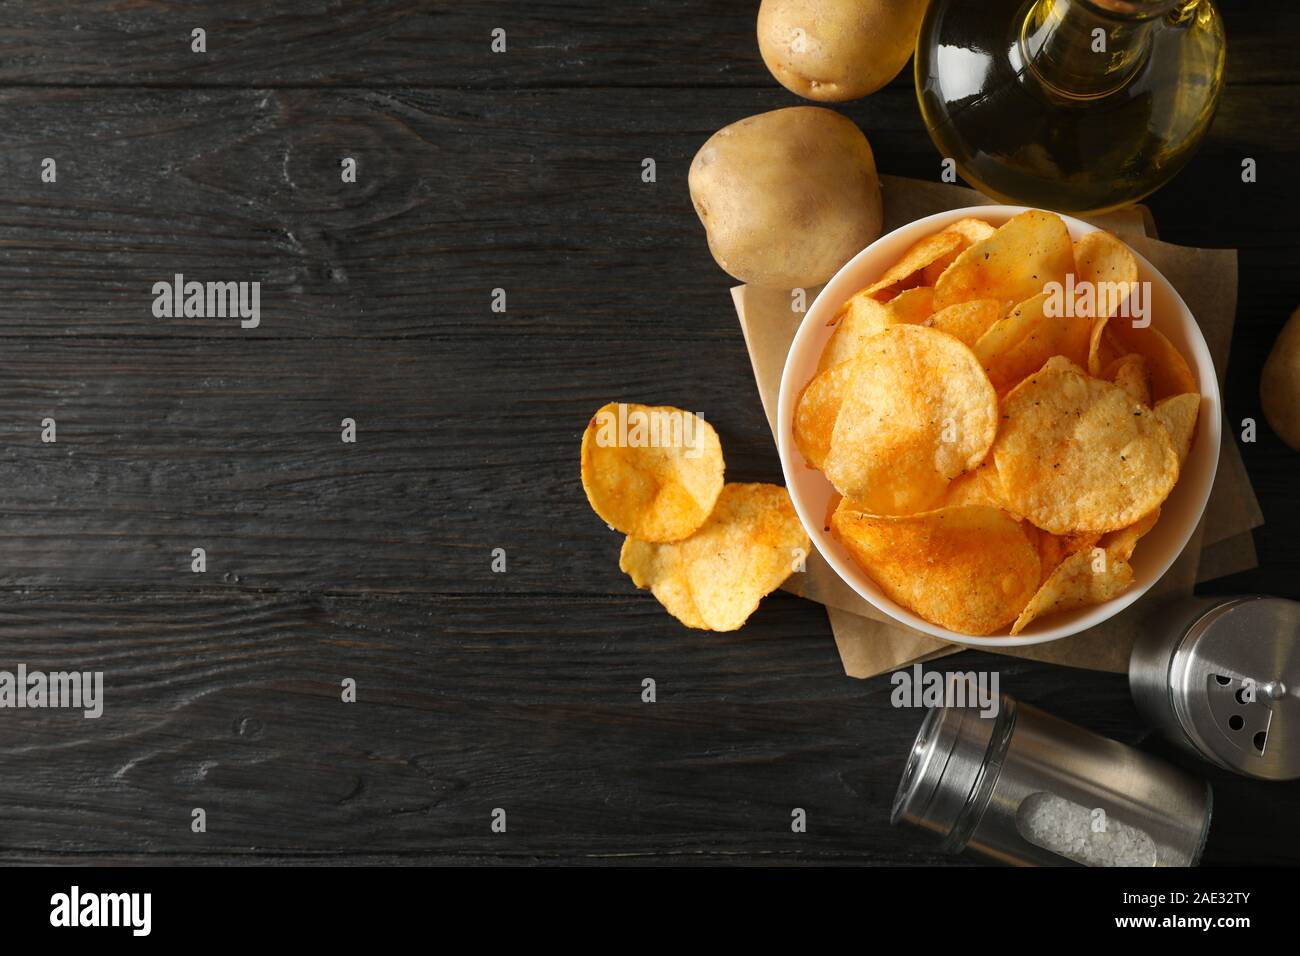 Potato chips in a bowl on craft paper. Potato, spice, olive oil on wooden background, space for text Stock Photo